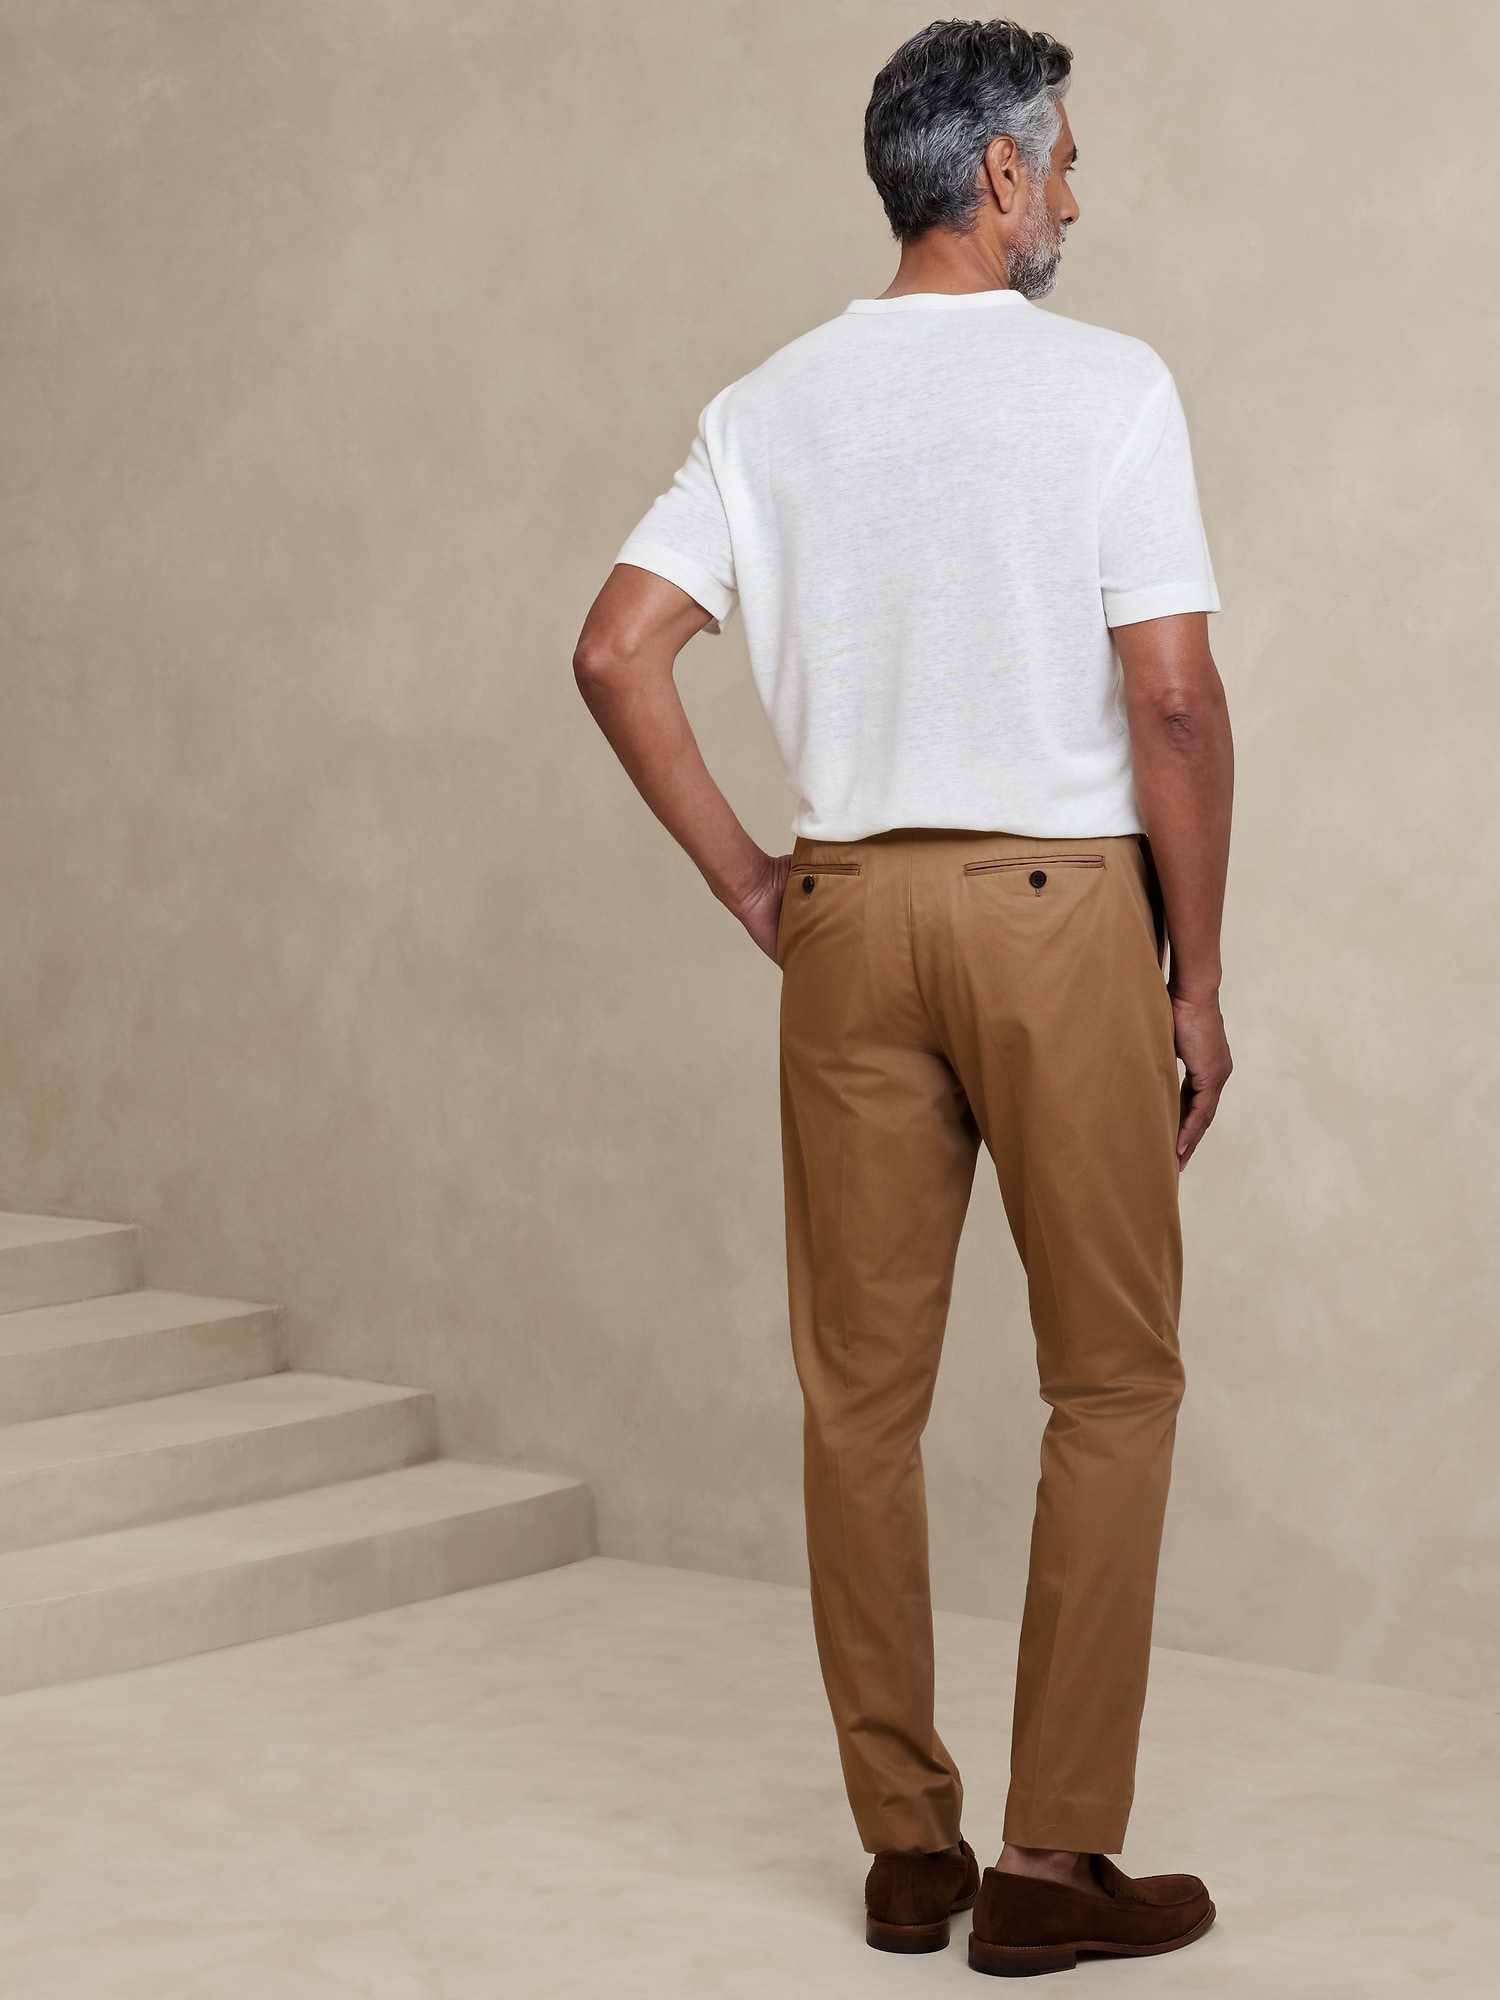 Check styling ideas for「Extra Fine Cotton Broadcloth Shirt、Slim-Fit Chino  Pants」| UNIQLO US